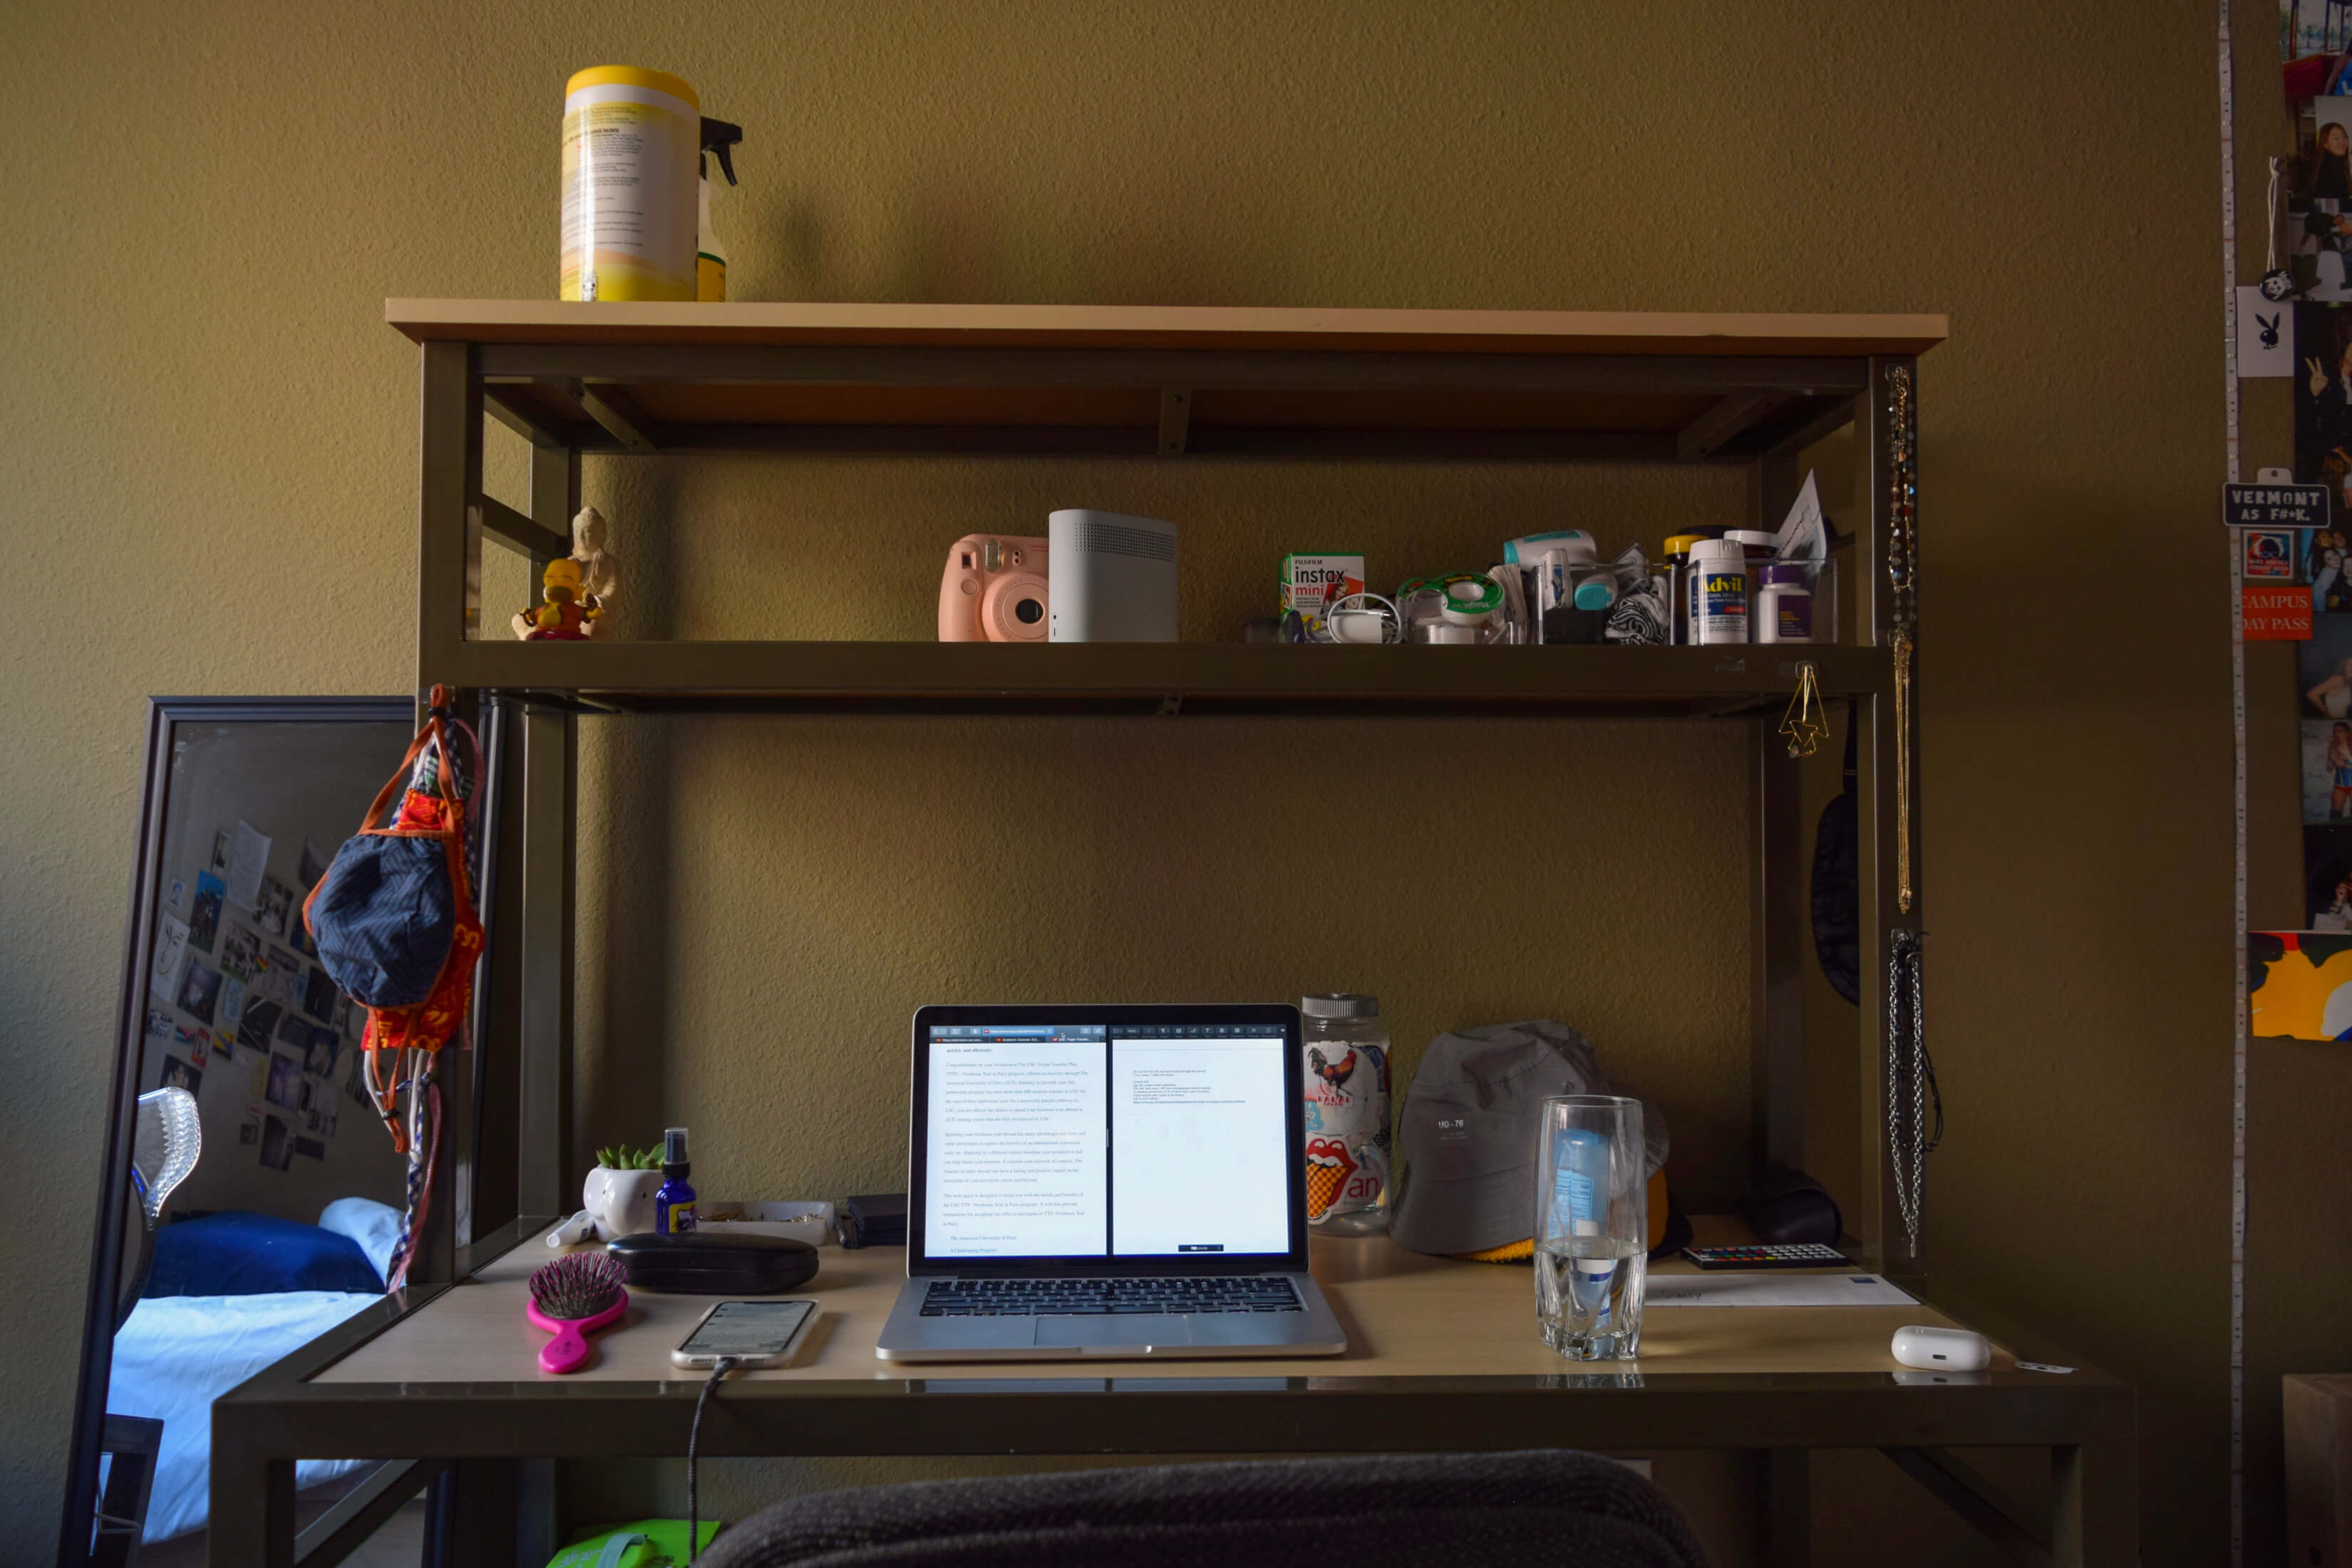 A dorm desk with laptop and other trinkets